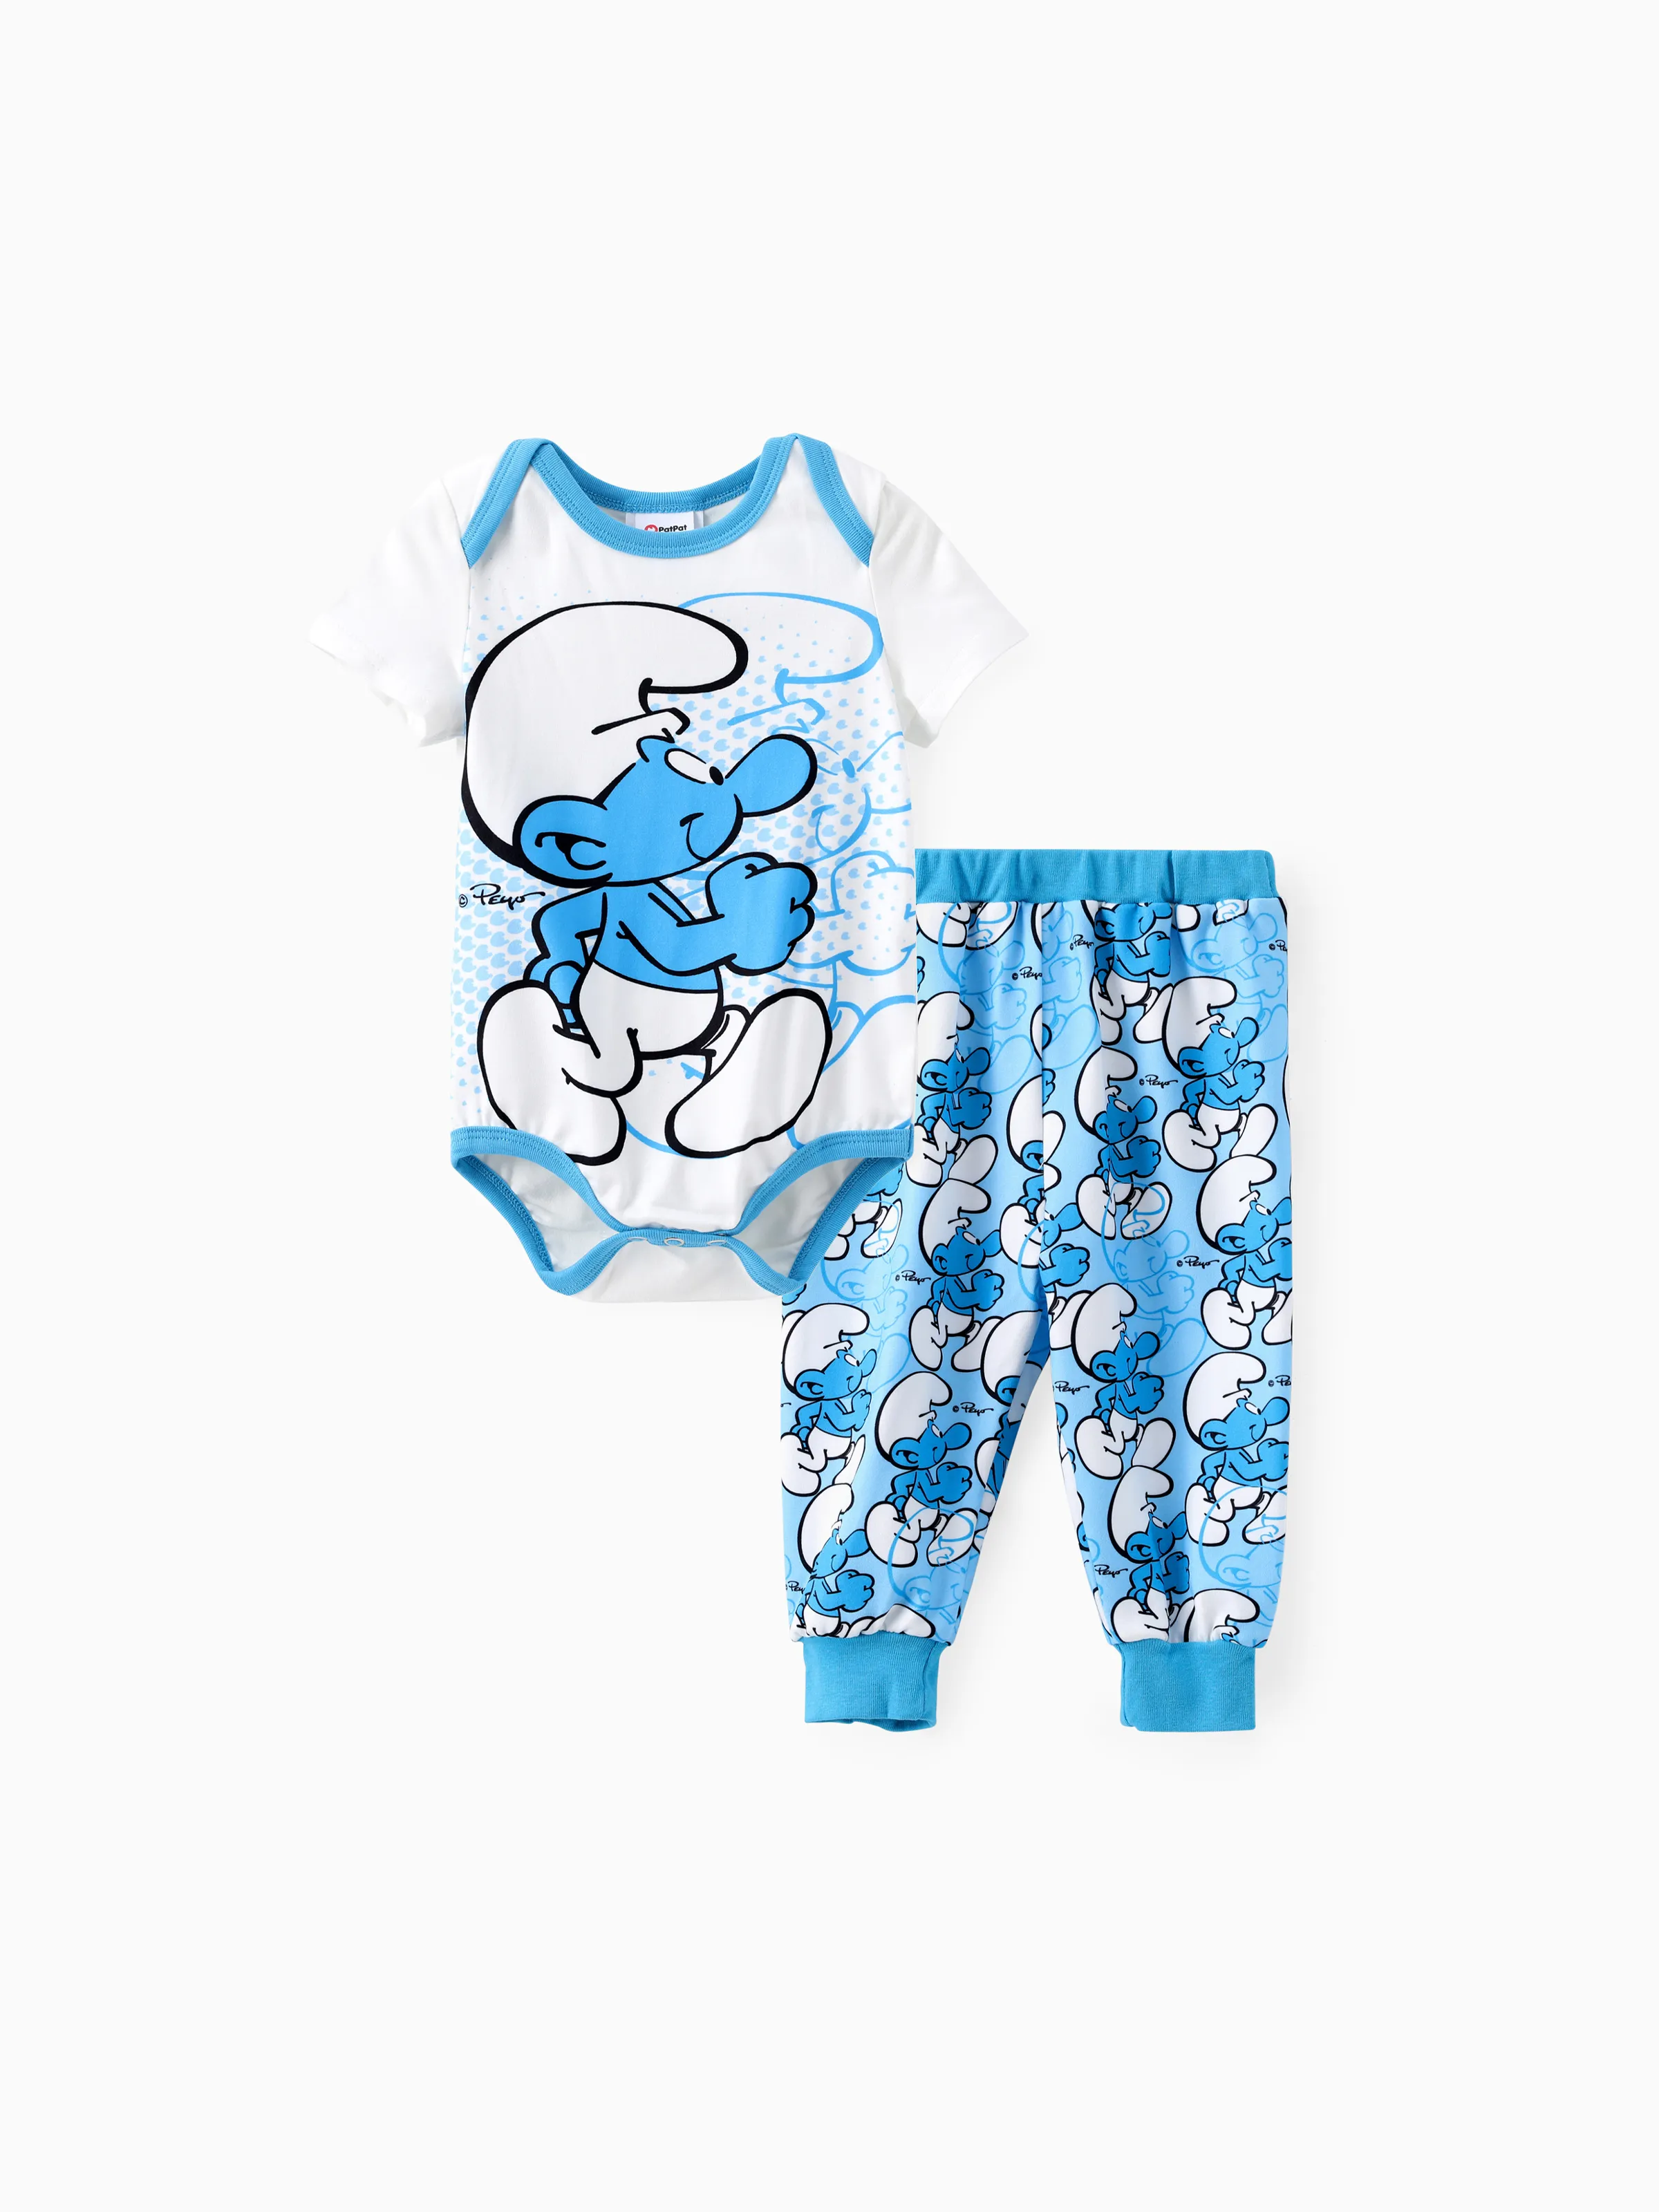 

The Smurfs Baby Boys/Girls 2pcs Character Print Short-sleeve Onesie with Pants Set